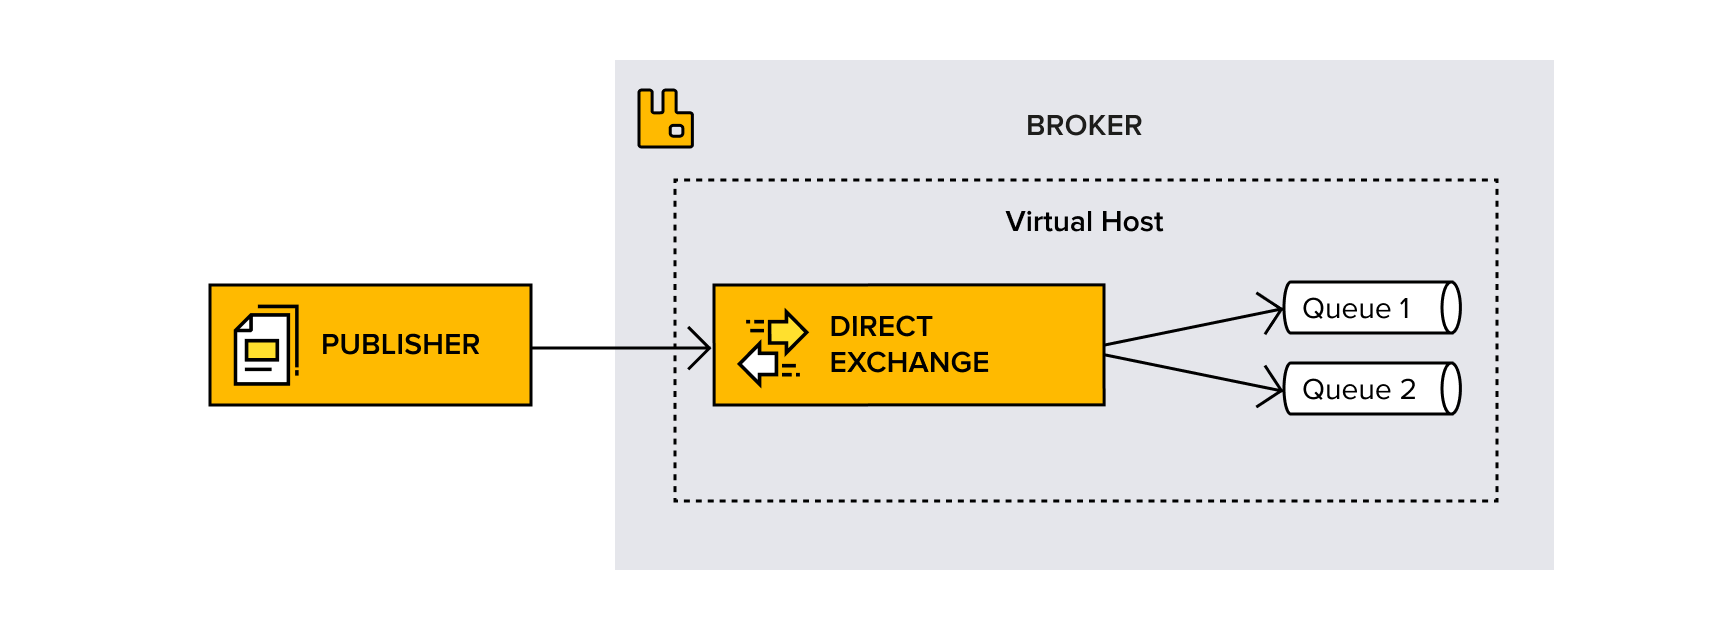 The direct exchange route messages to specific queues